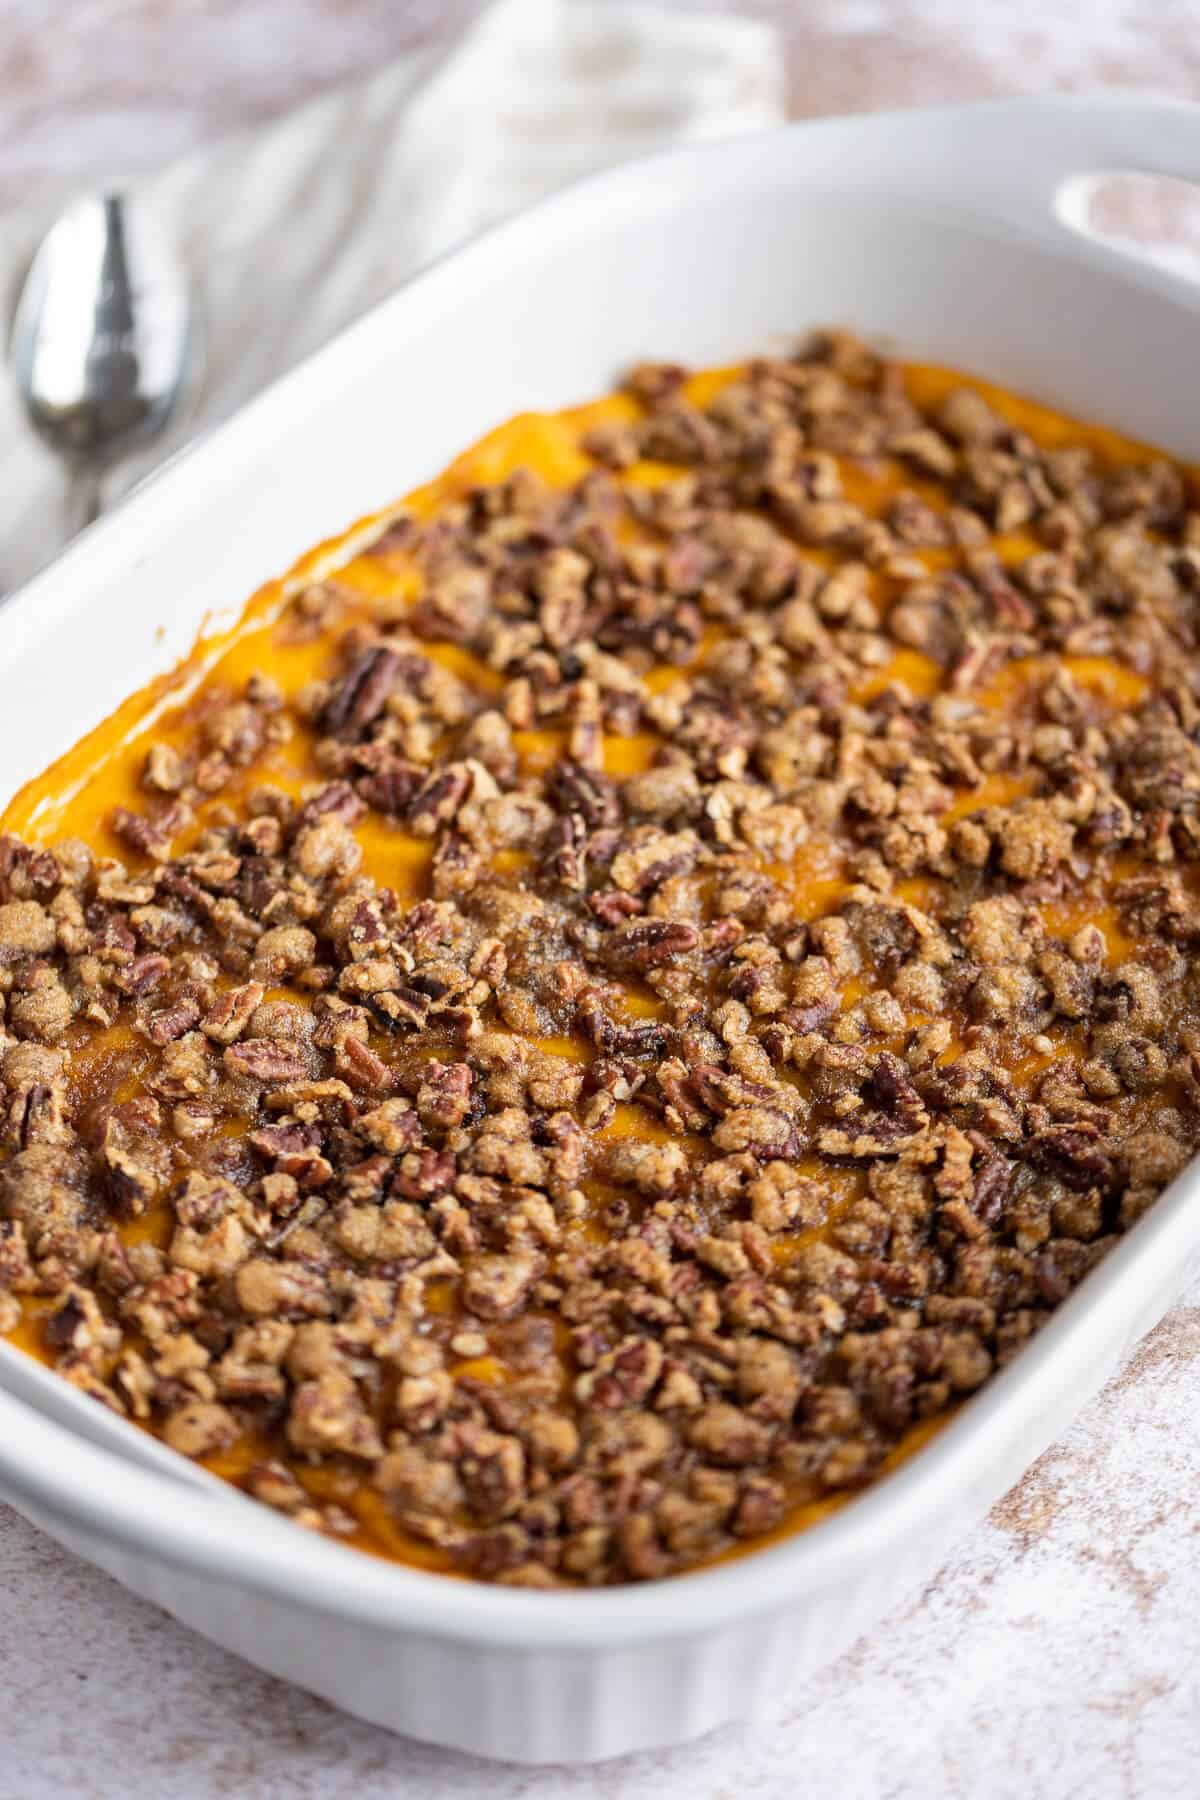 Sweet Potato Casserole with Praline topping in a white dish.